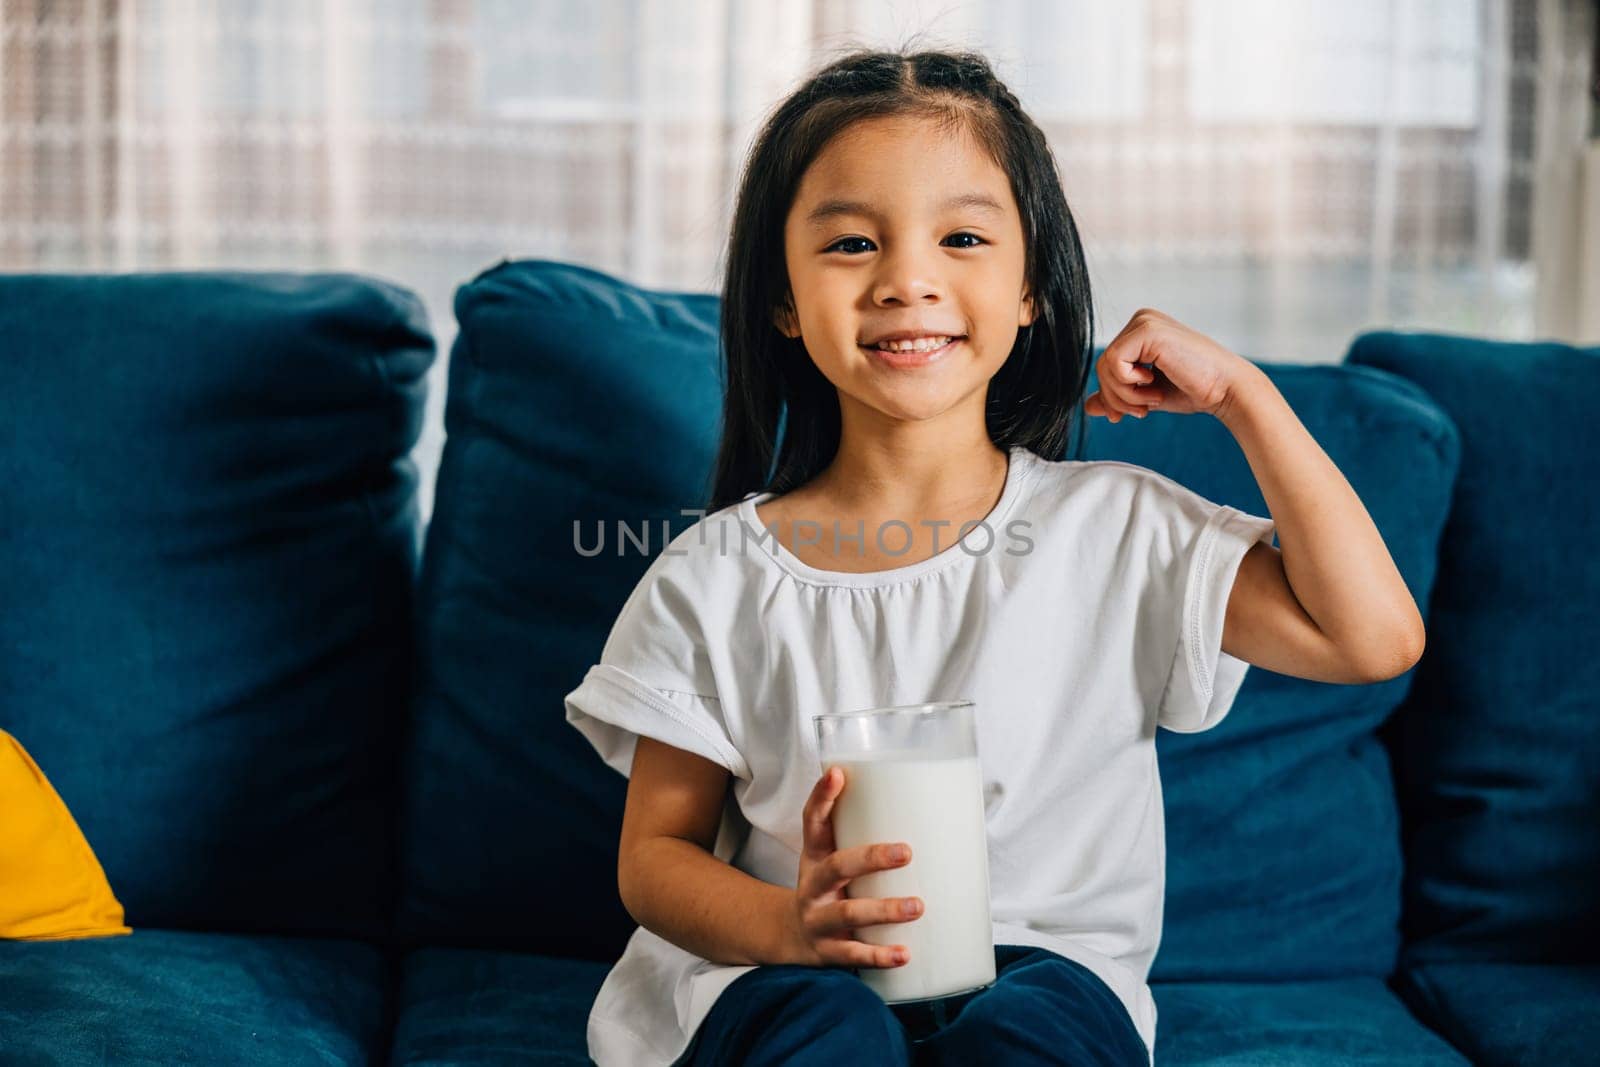 Close-up of happy Asian girl holding glass of milk her delighted face showcasing joy of a nutritious drink on the cozy sofa at home. A heartwarming portrayal of daily health care and childhood bliss.